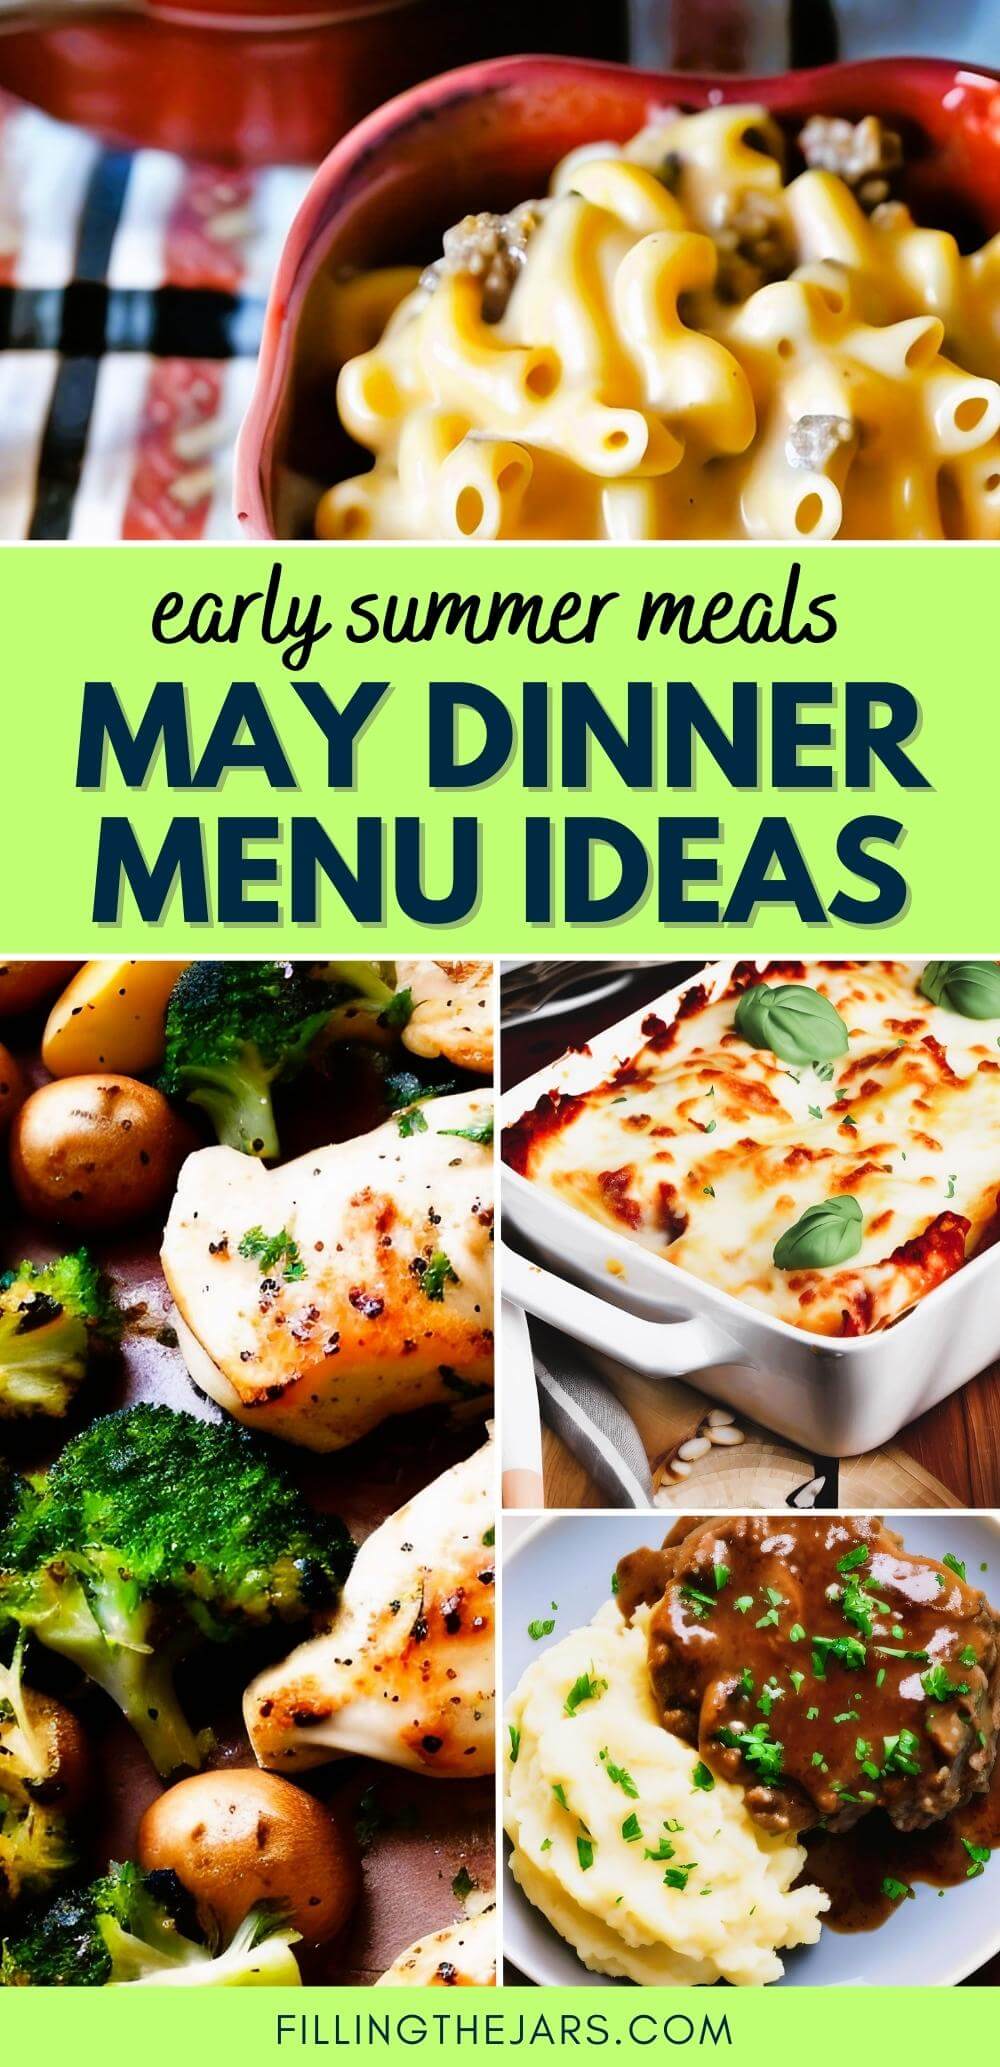 Text early summer meals May dinner menu ideas on light green banner over multiple finished dinner images.